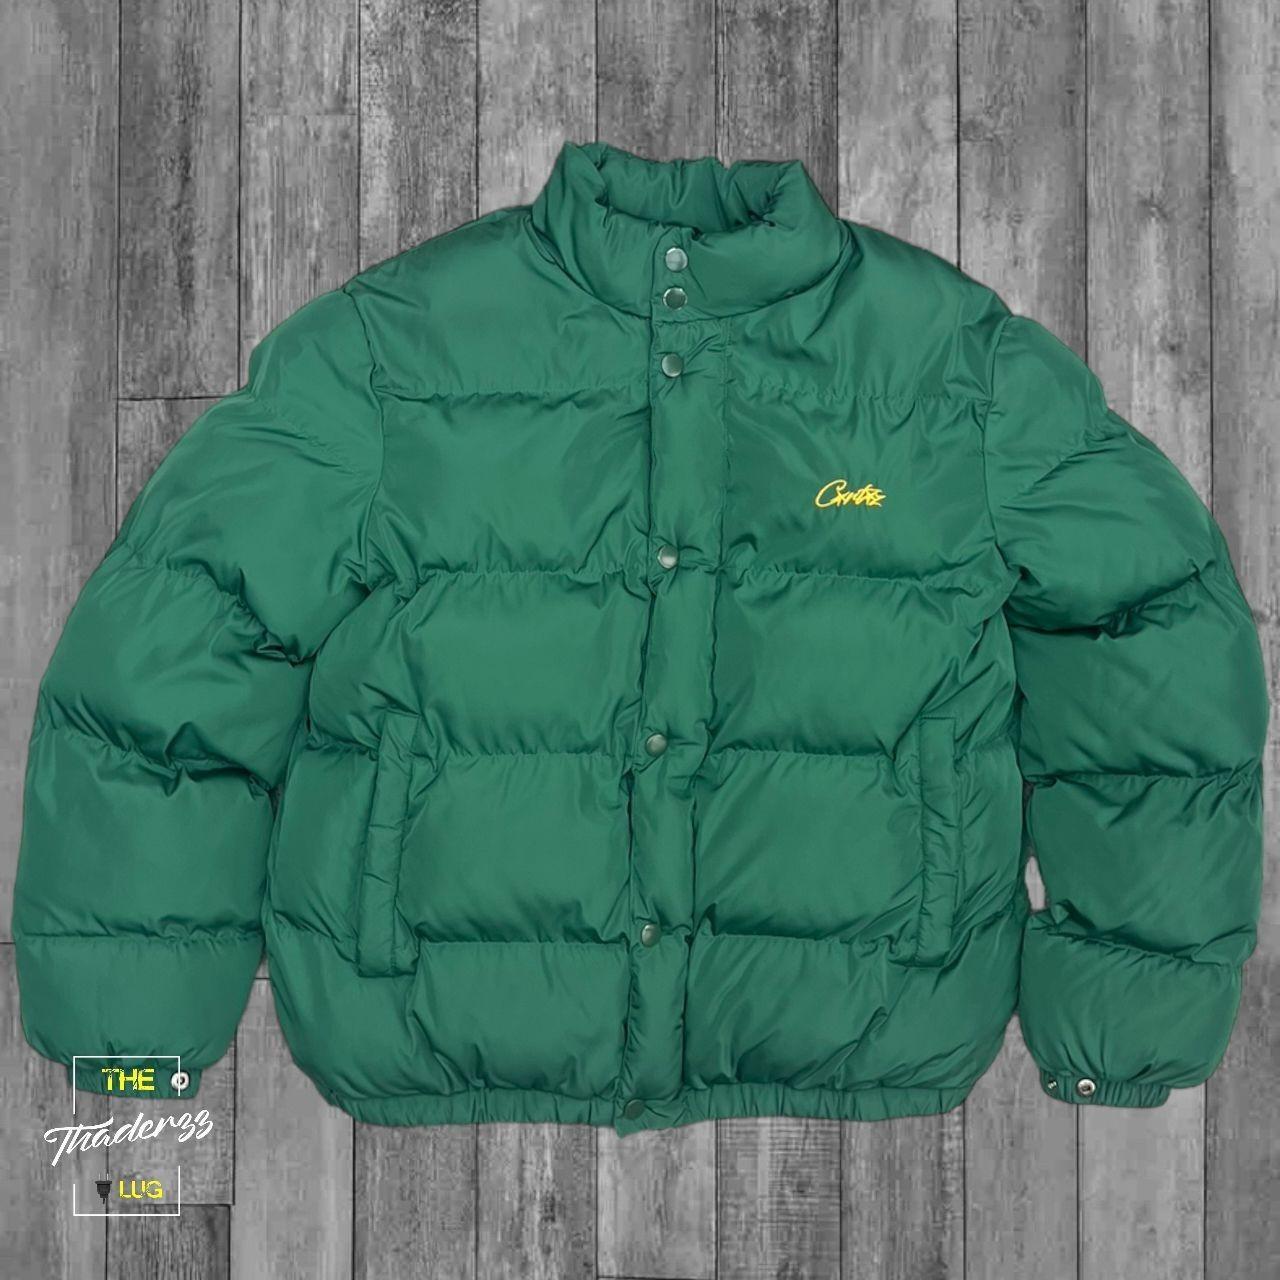 Corteiz Puffer Jacket “Bolo” In Green/Yellow 🐍 COLD... - Depop